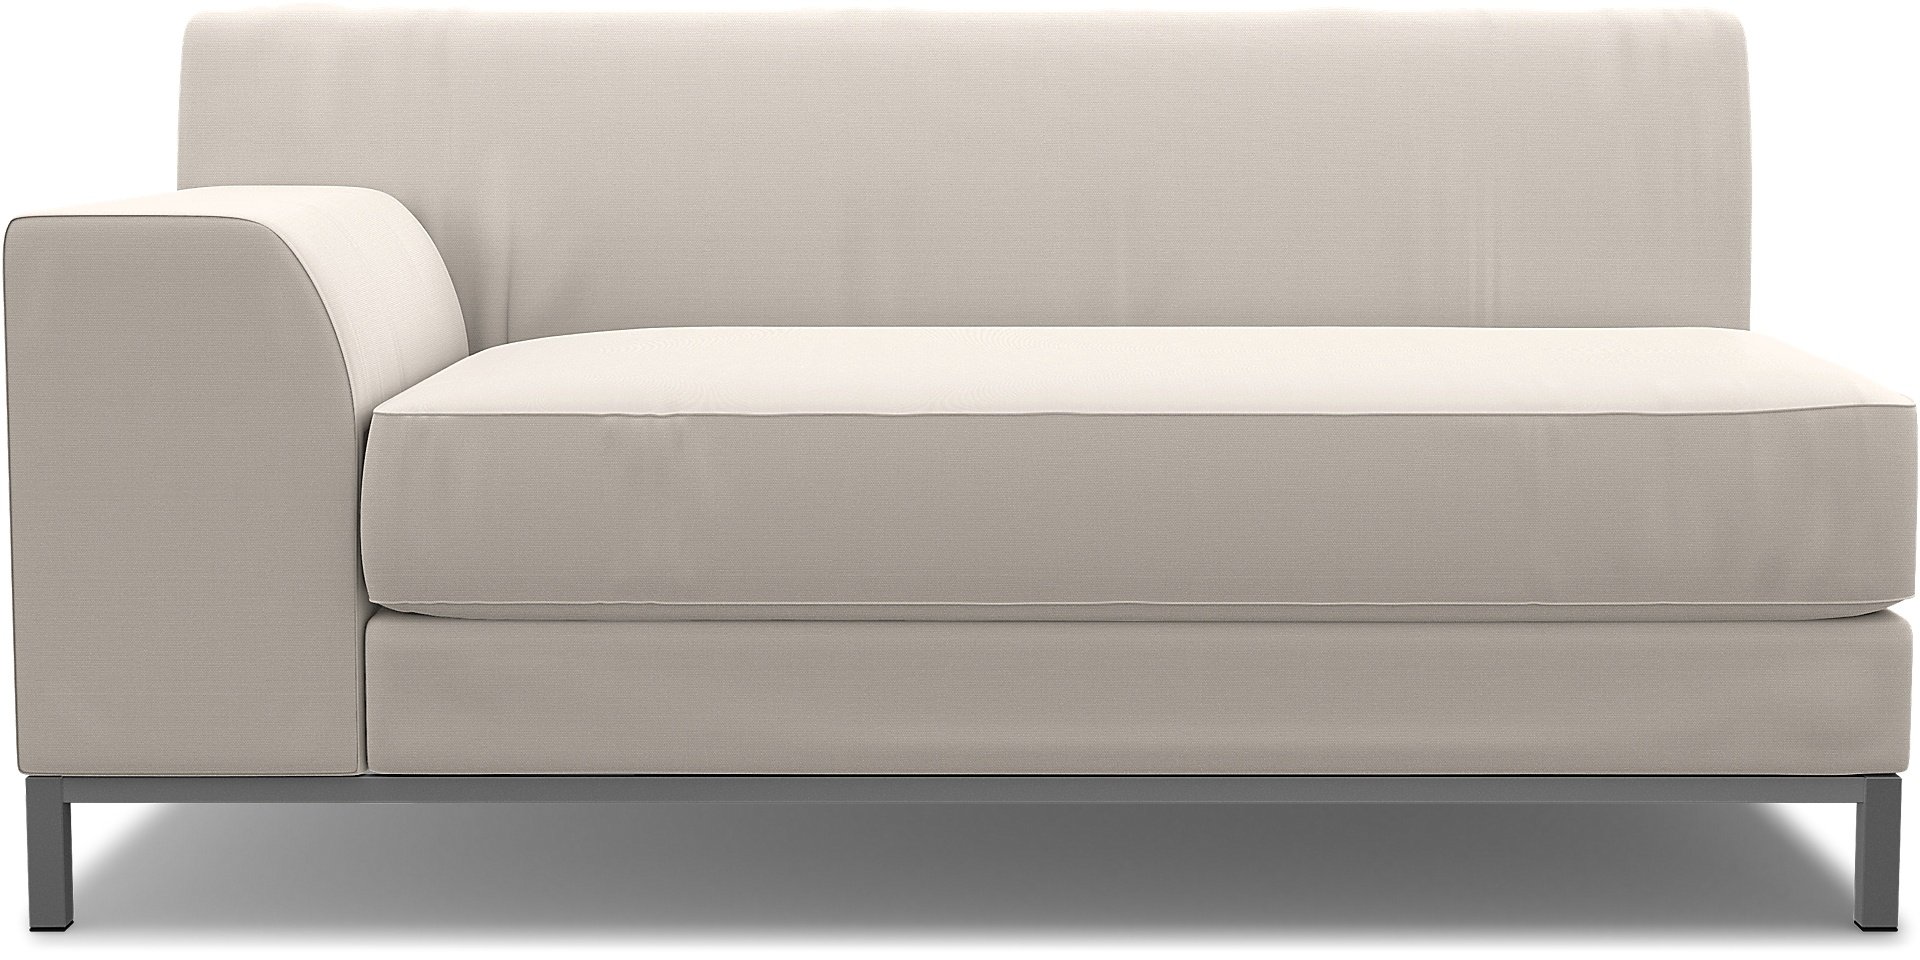 IKEA - Kramfors 2 Seater Sofa with Left Arm Cover, Soft White, Cotton - Bemz